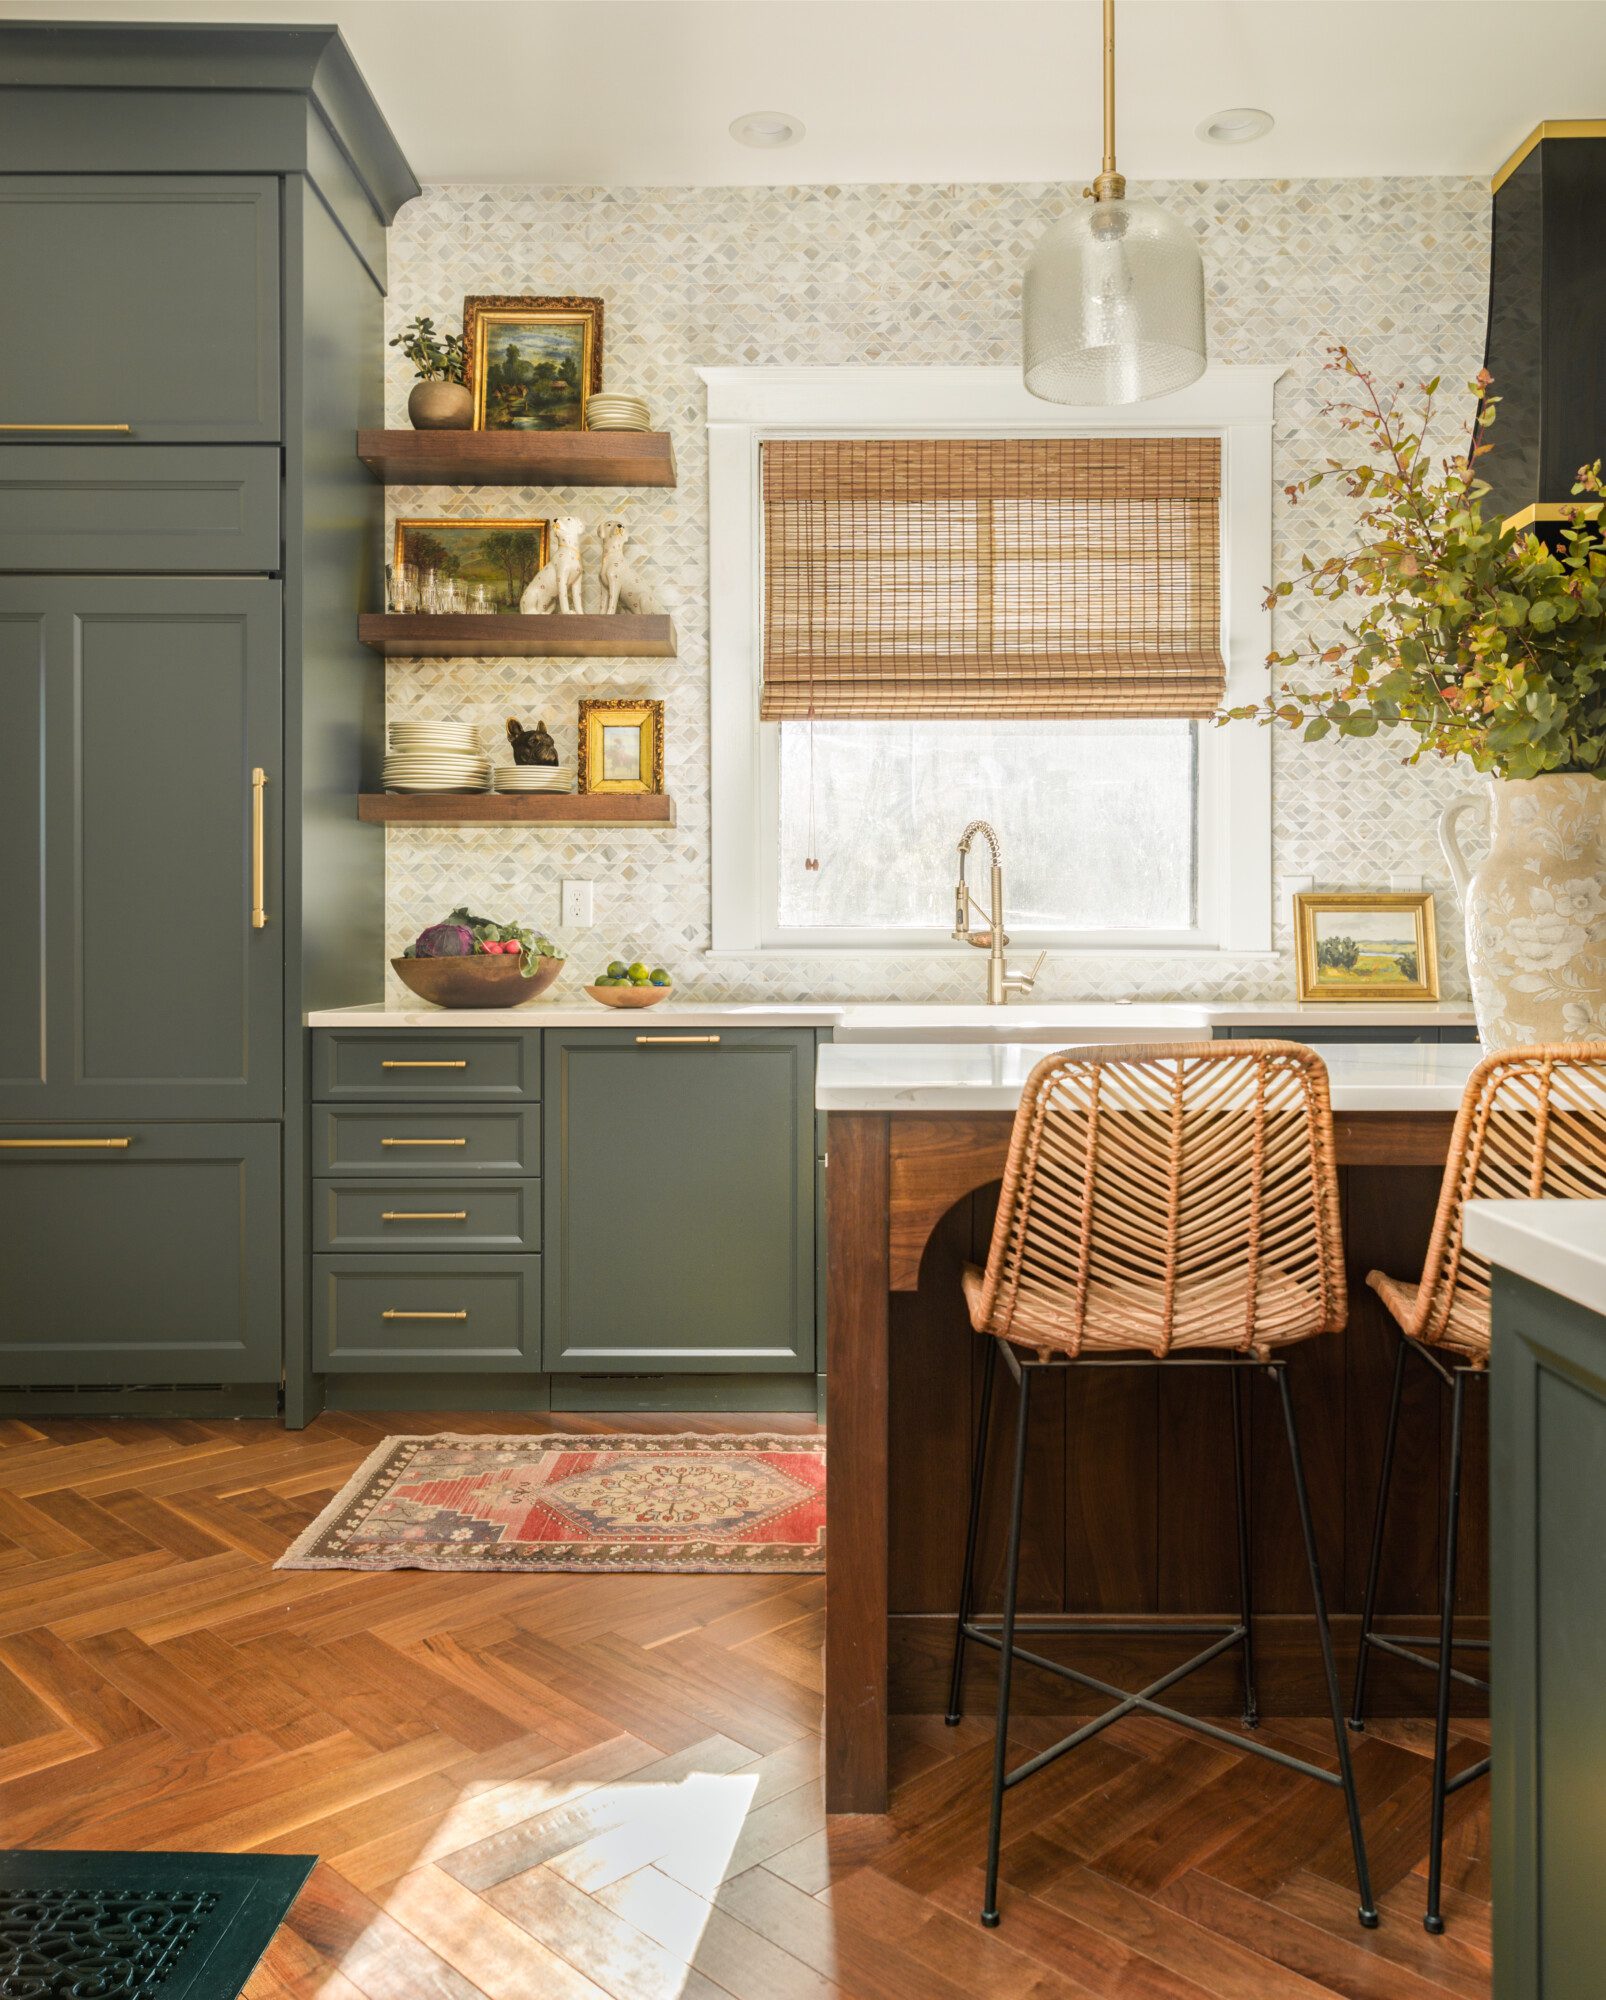 natural wood compliment the greens in this sunny kitchen